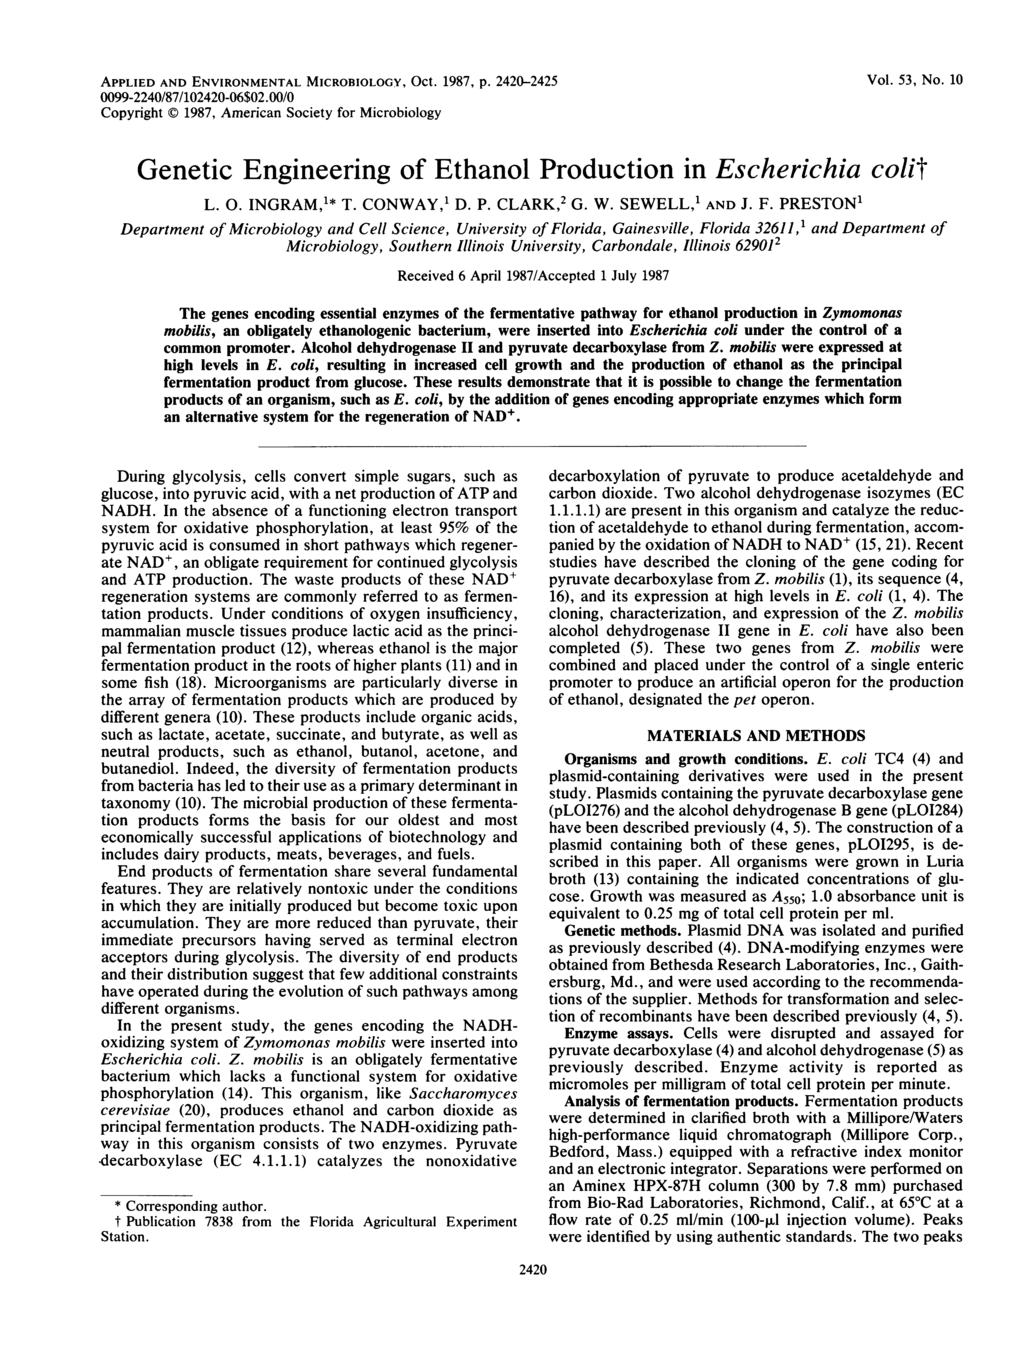 APPLIED AND ENVIRONMENTAL MICROBIOLOGY, OCt. 1987, p. 2420-2425 0099-2240/87/102420-06$02.00/0 Copyright 1987, American Society for Microbiology Vol. 53, No.